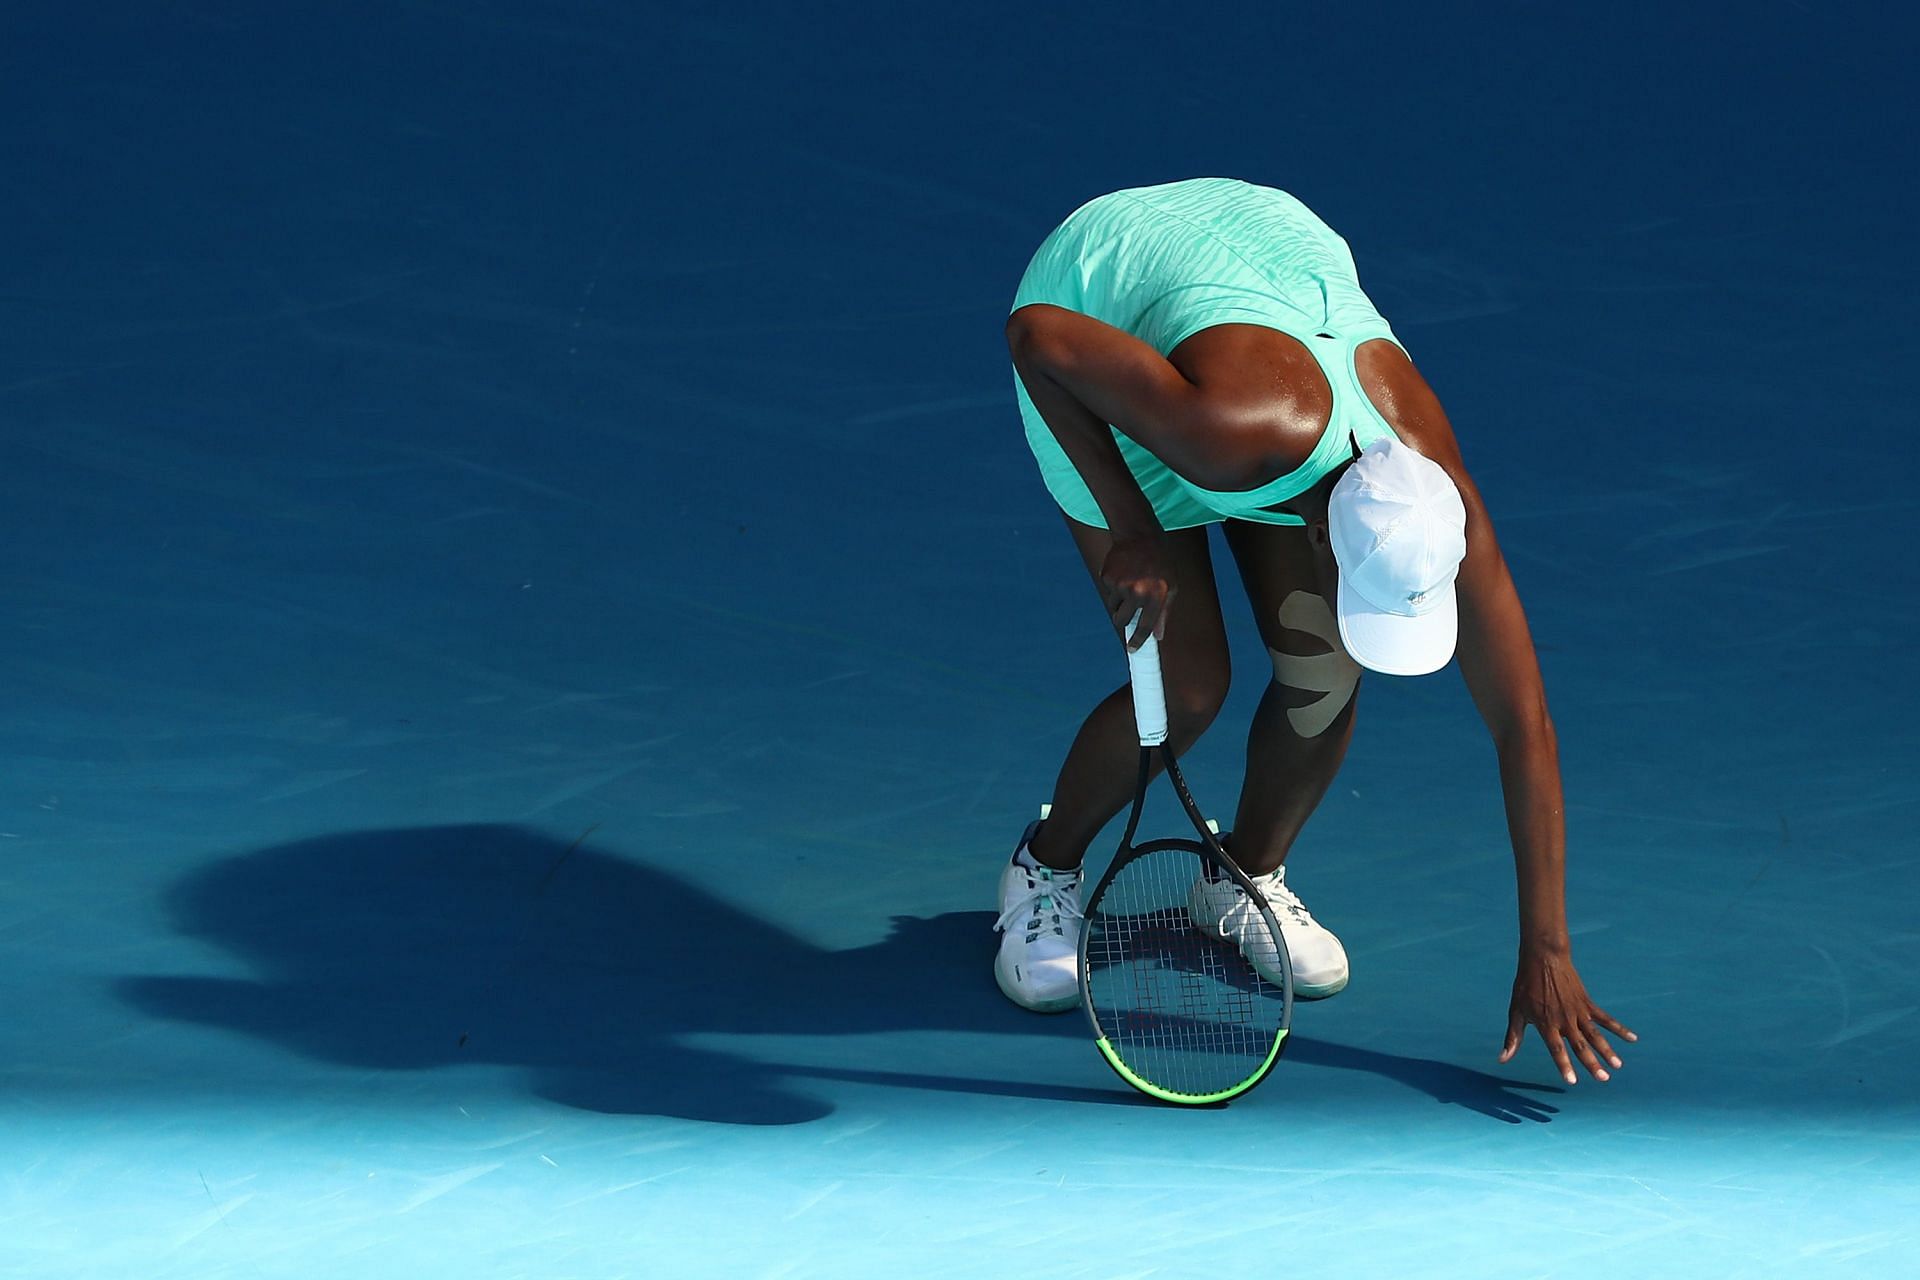 Williams suffered an injury duirng her second-round encounter at the 2021 Australian Open.